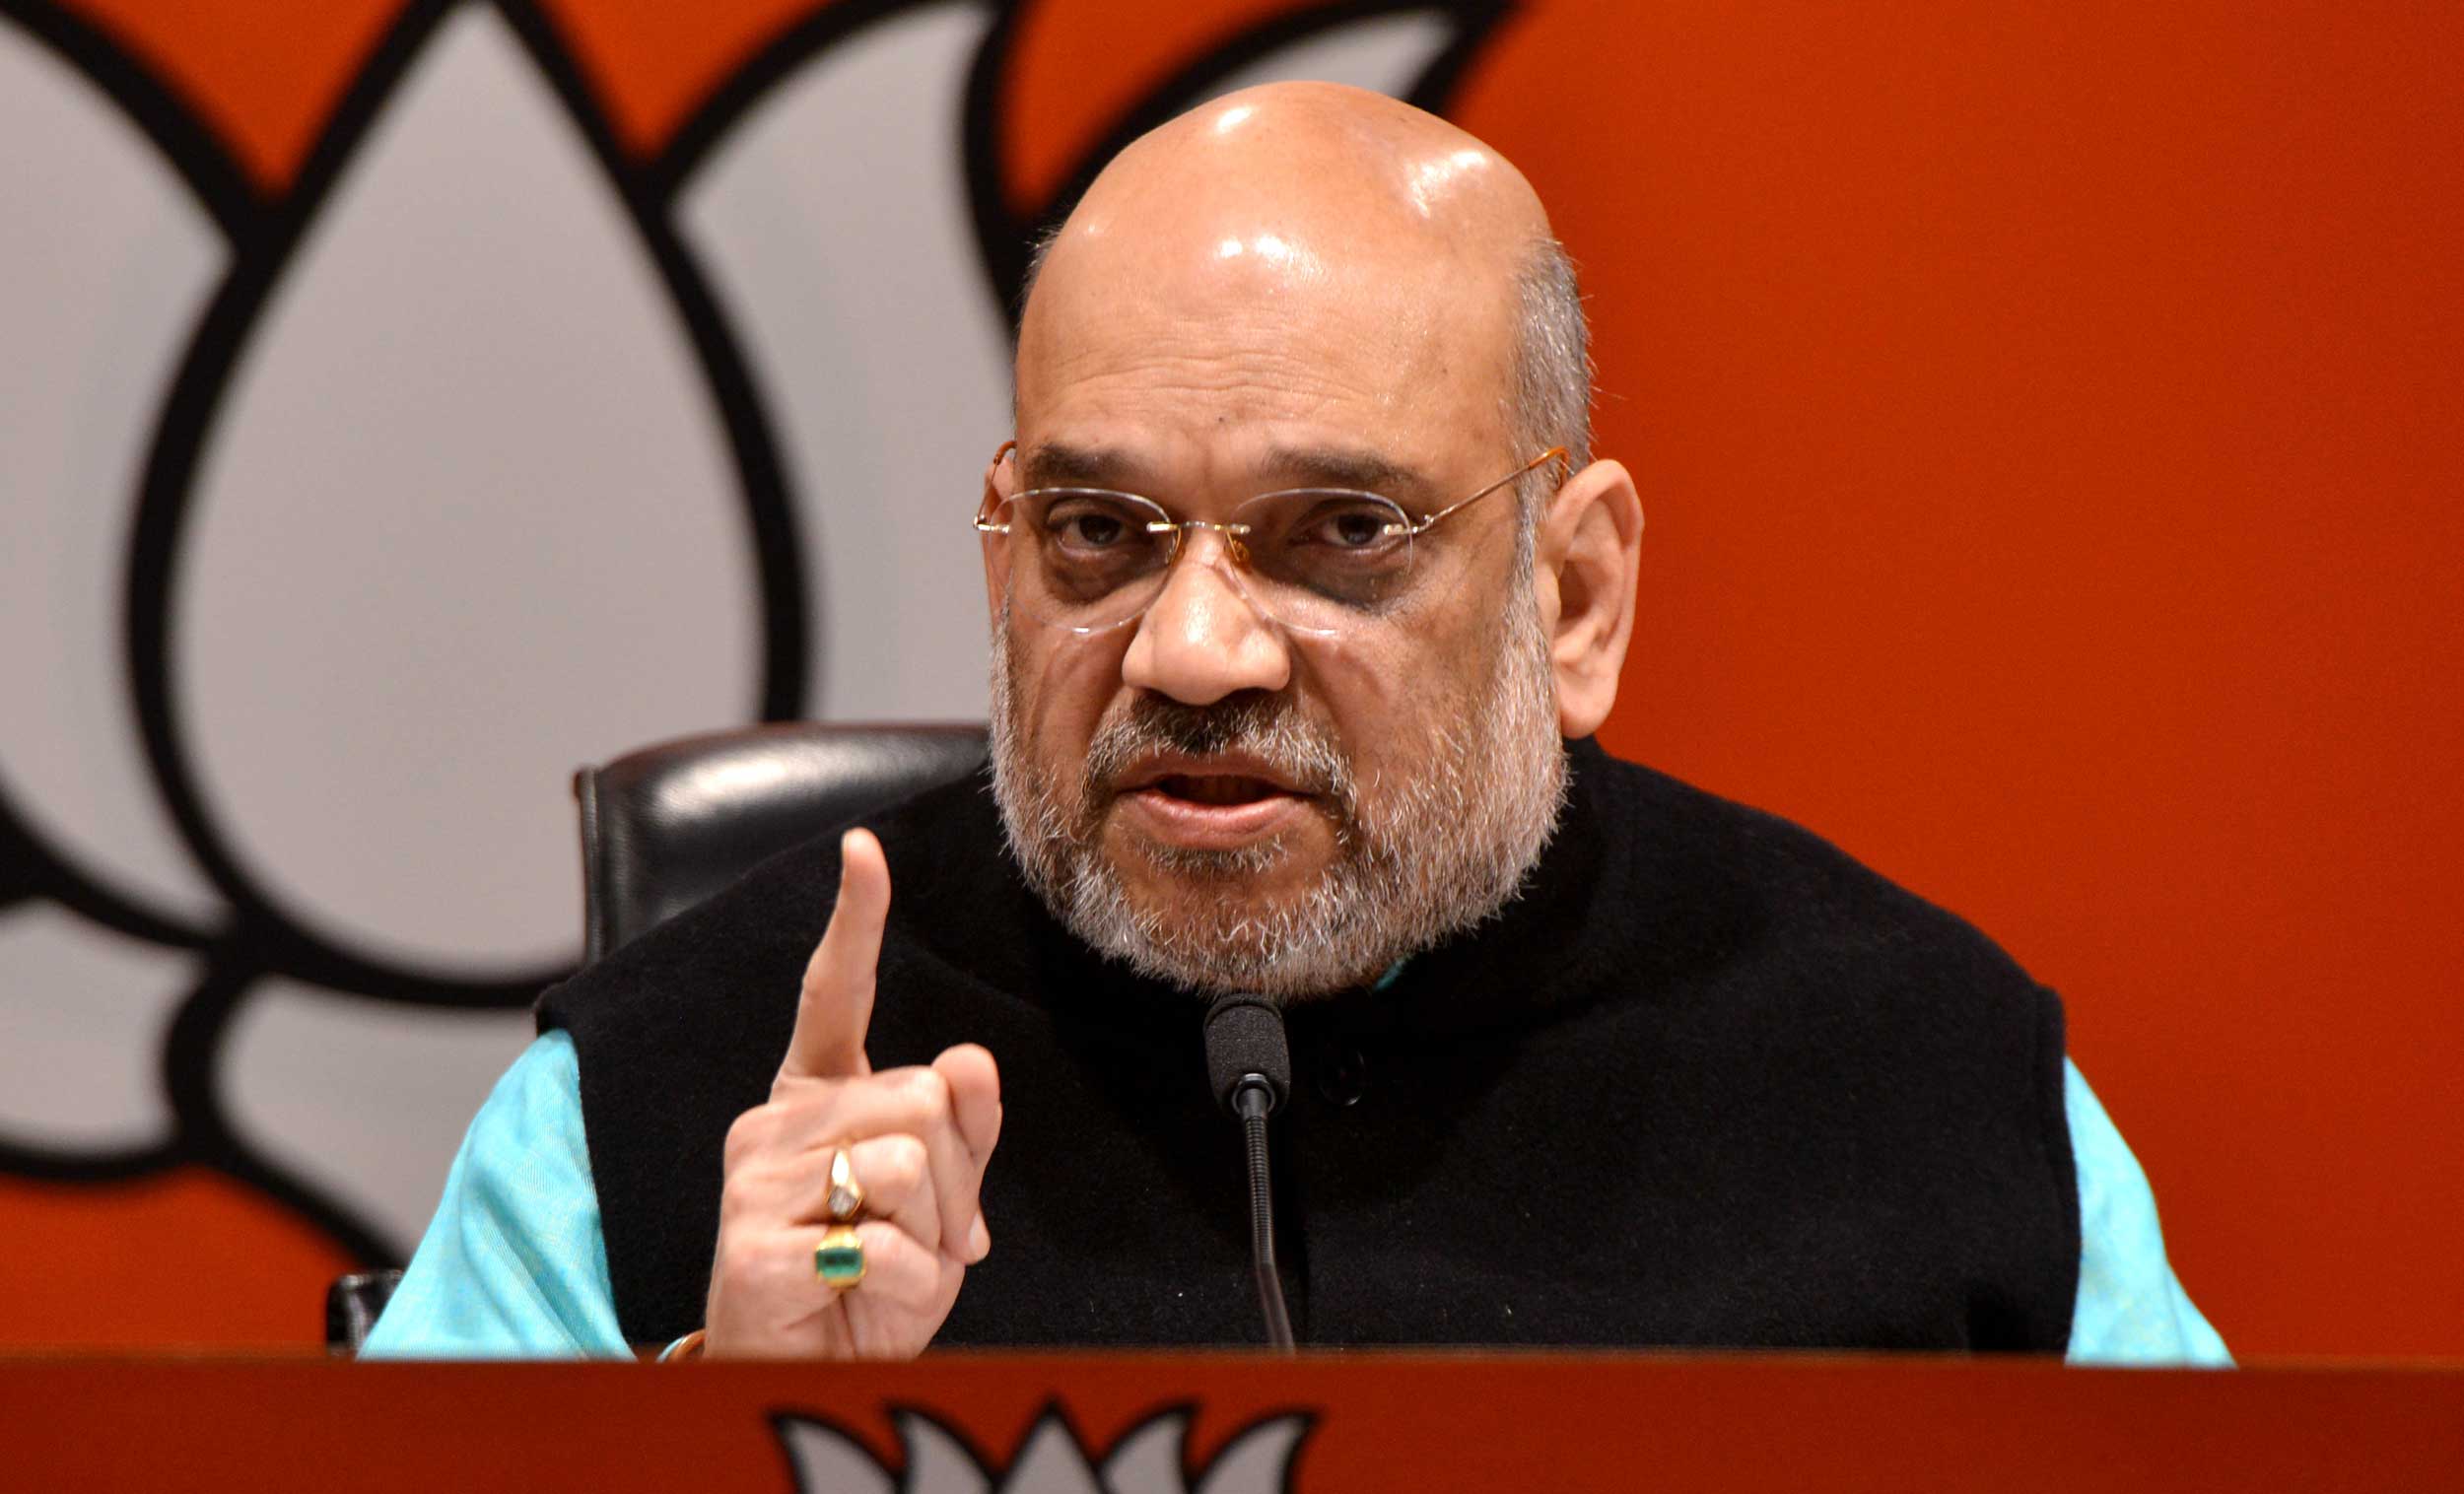 Amit Shah said the NPR process was aimed at collecting data for government schemes meant for the welfare of “poor and the minorities” and accused the Opposition of depriving the poor by opposing it.
